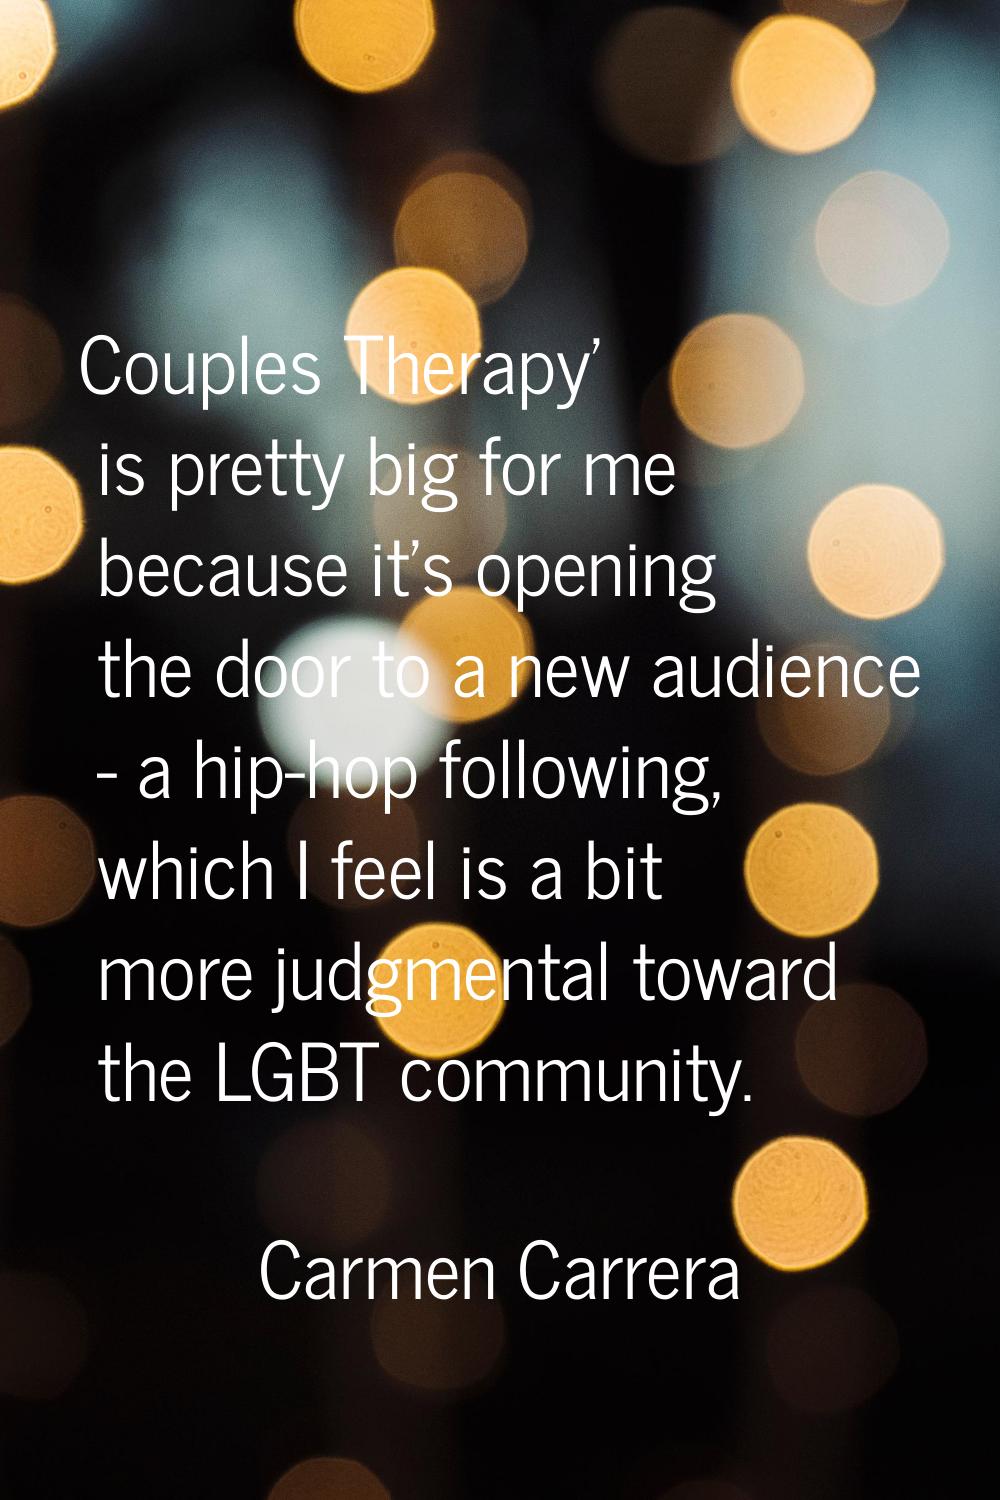 Couples Therapy' is pretty big for me because it's opening the door to a new audience - a hip-hop f